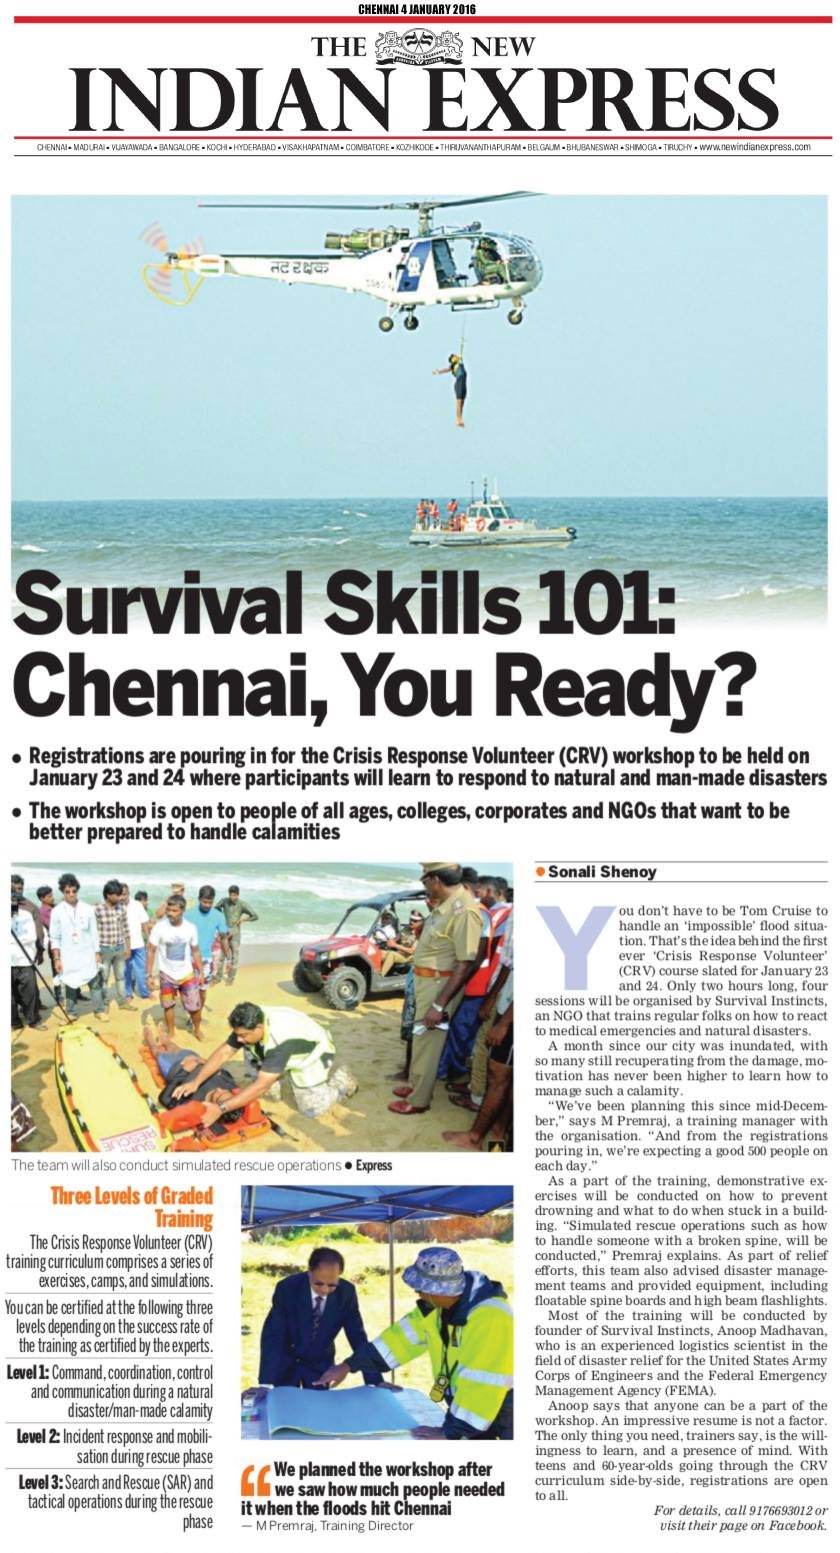 Register for Our Disaster Response Training Featured on Indian Express: Visit http: bit.ly si crv